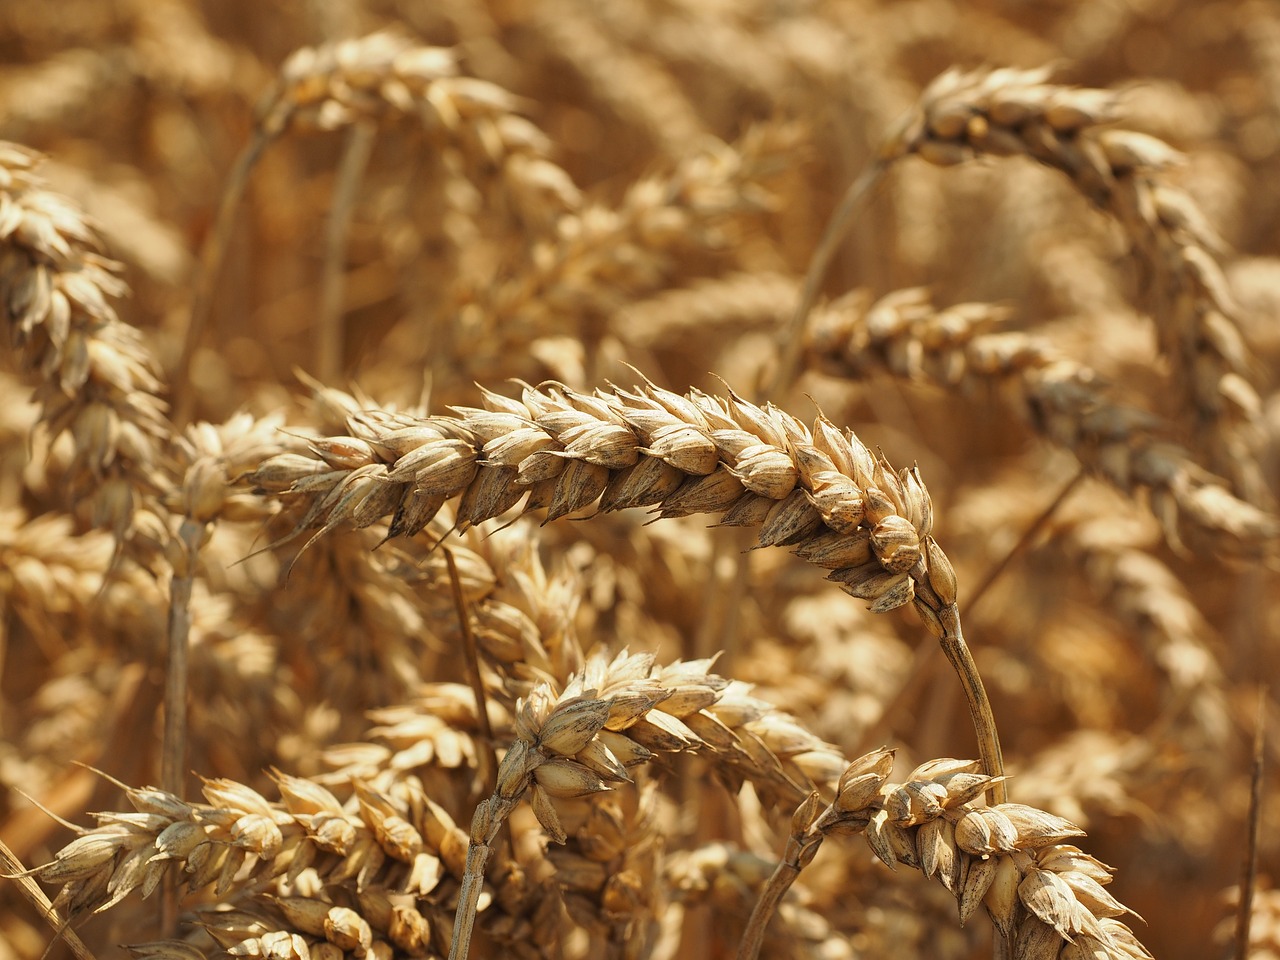 a field of wheat ready to be harvested, by David Simpson, symbolism, close - up photo, istockphoto, stock photo